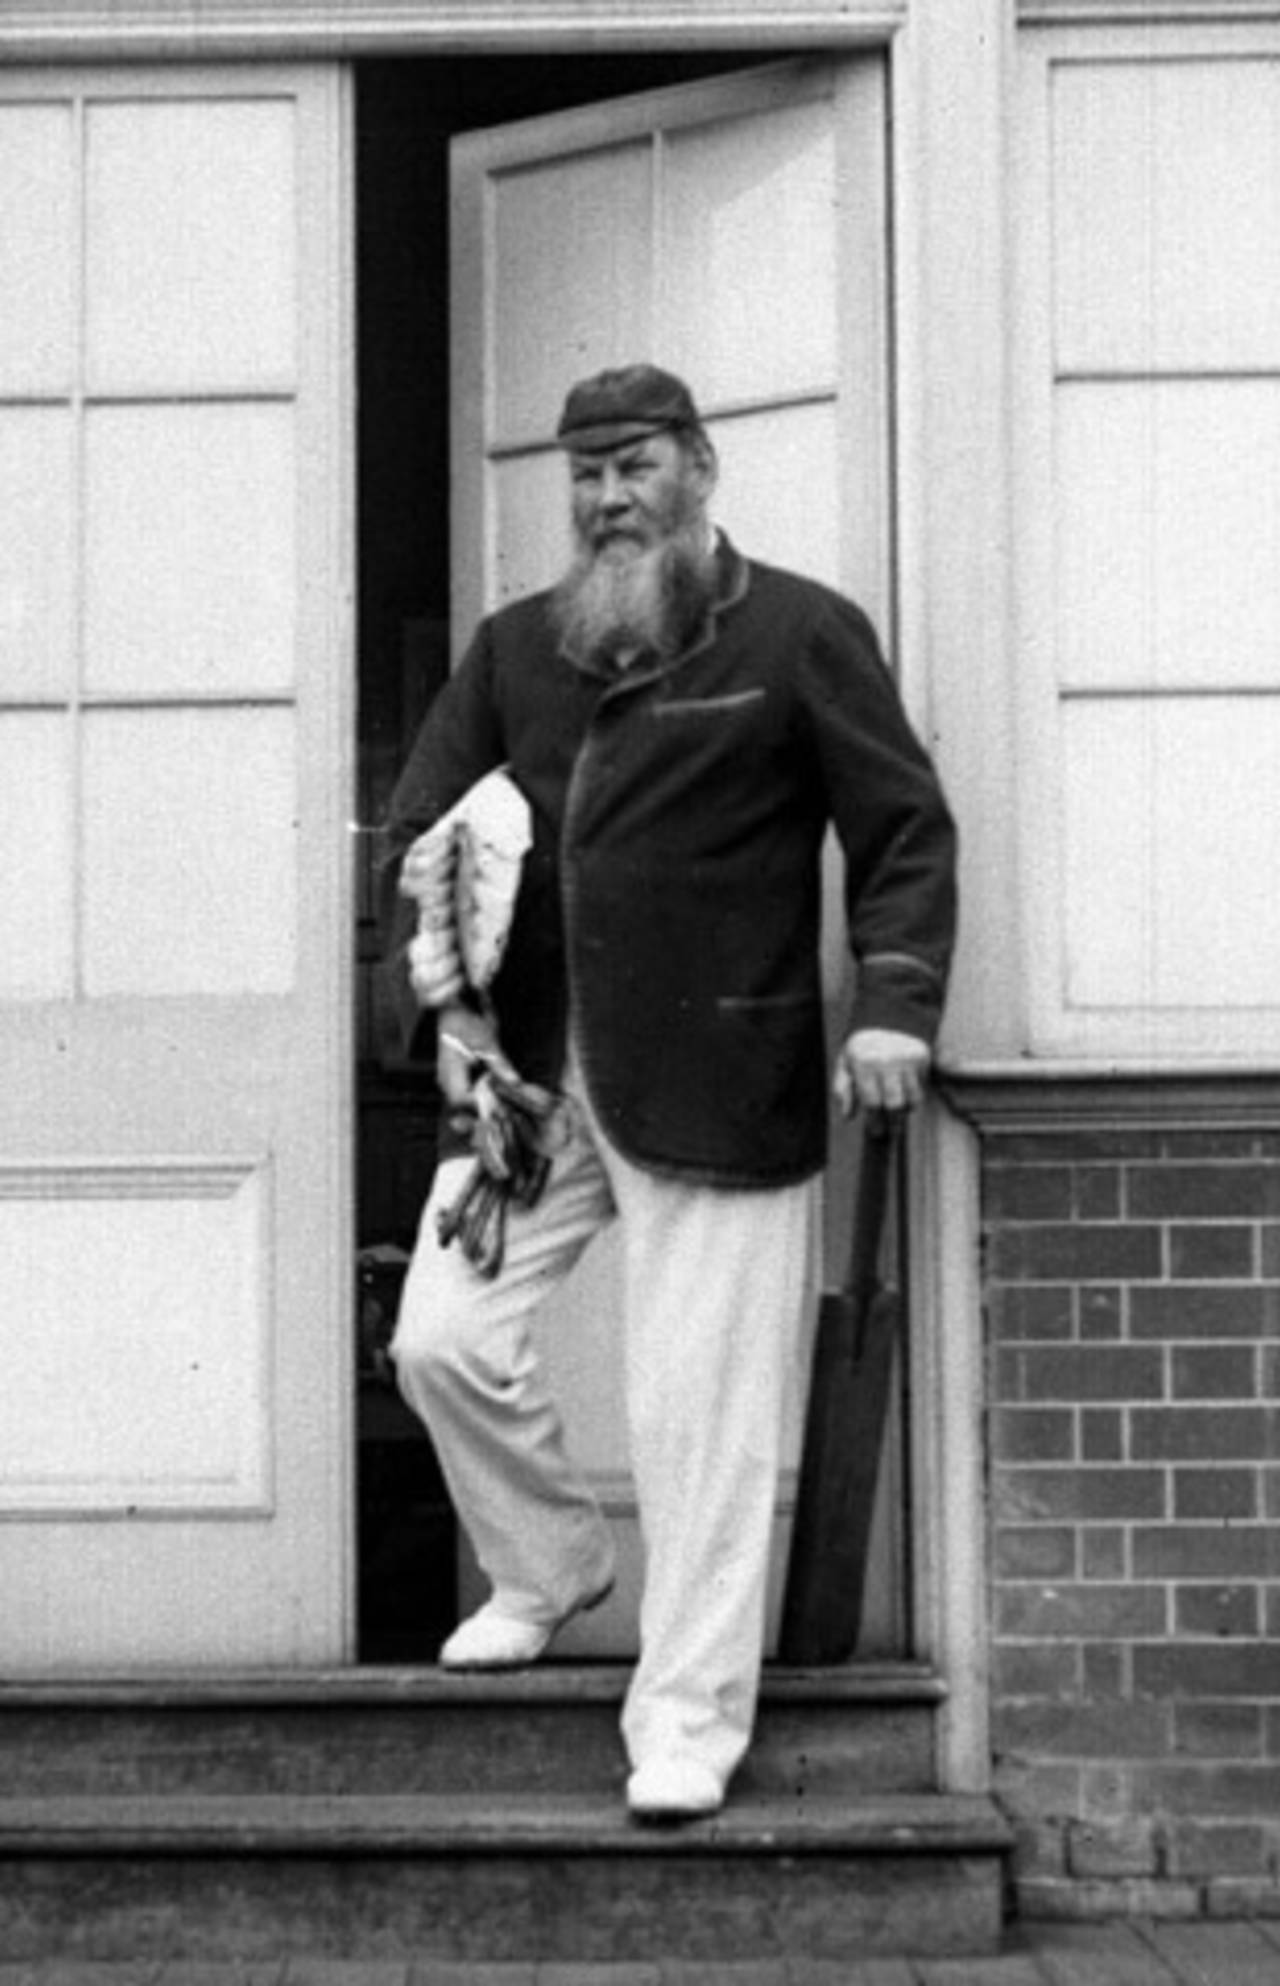 WG Grace poses with his cricket gear, May 1, 1906